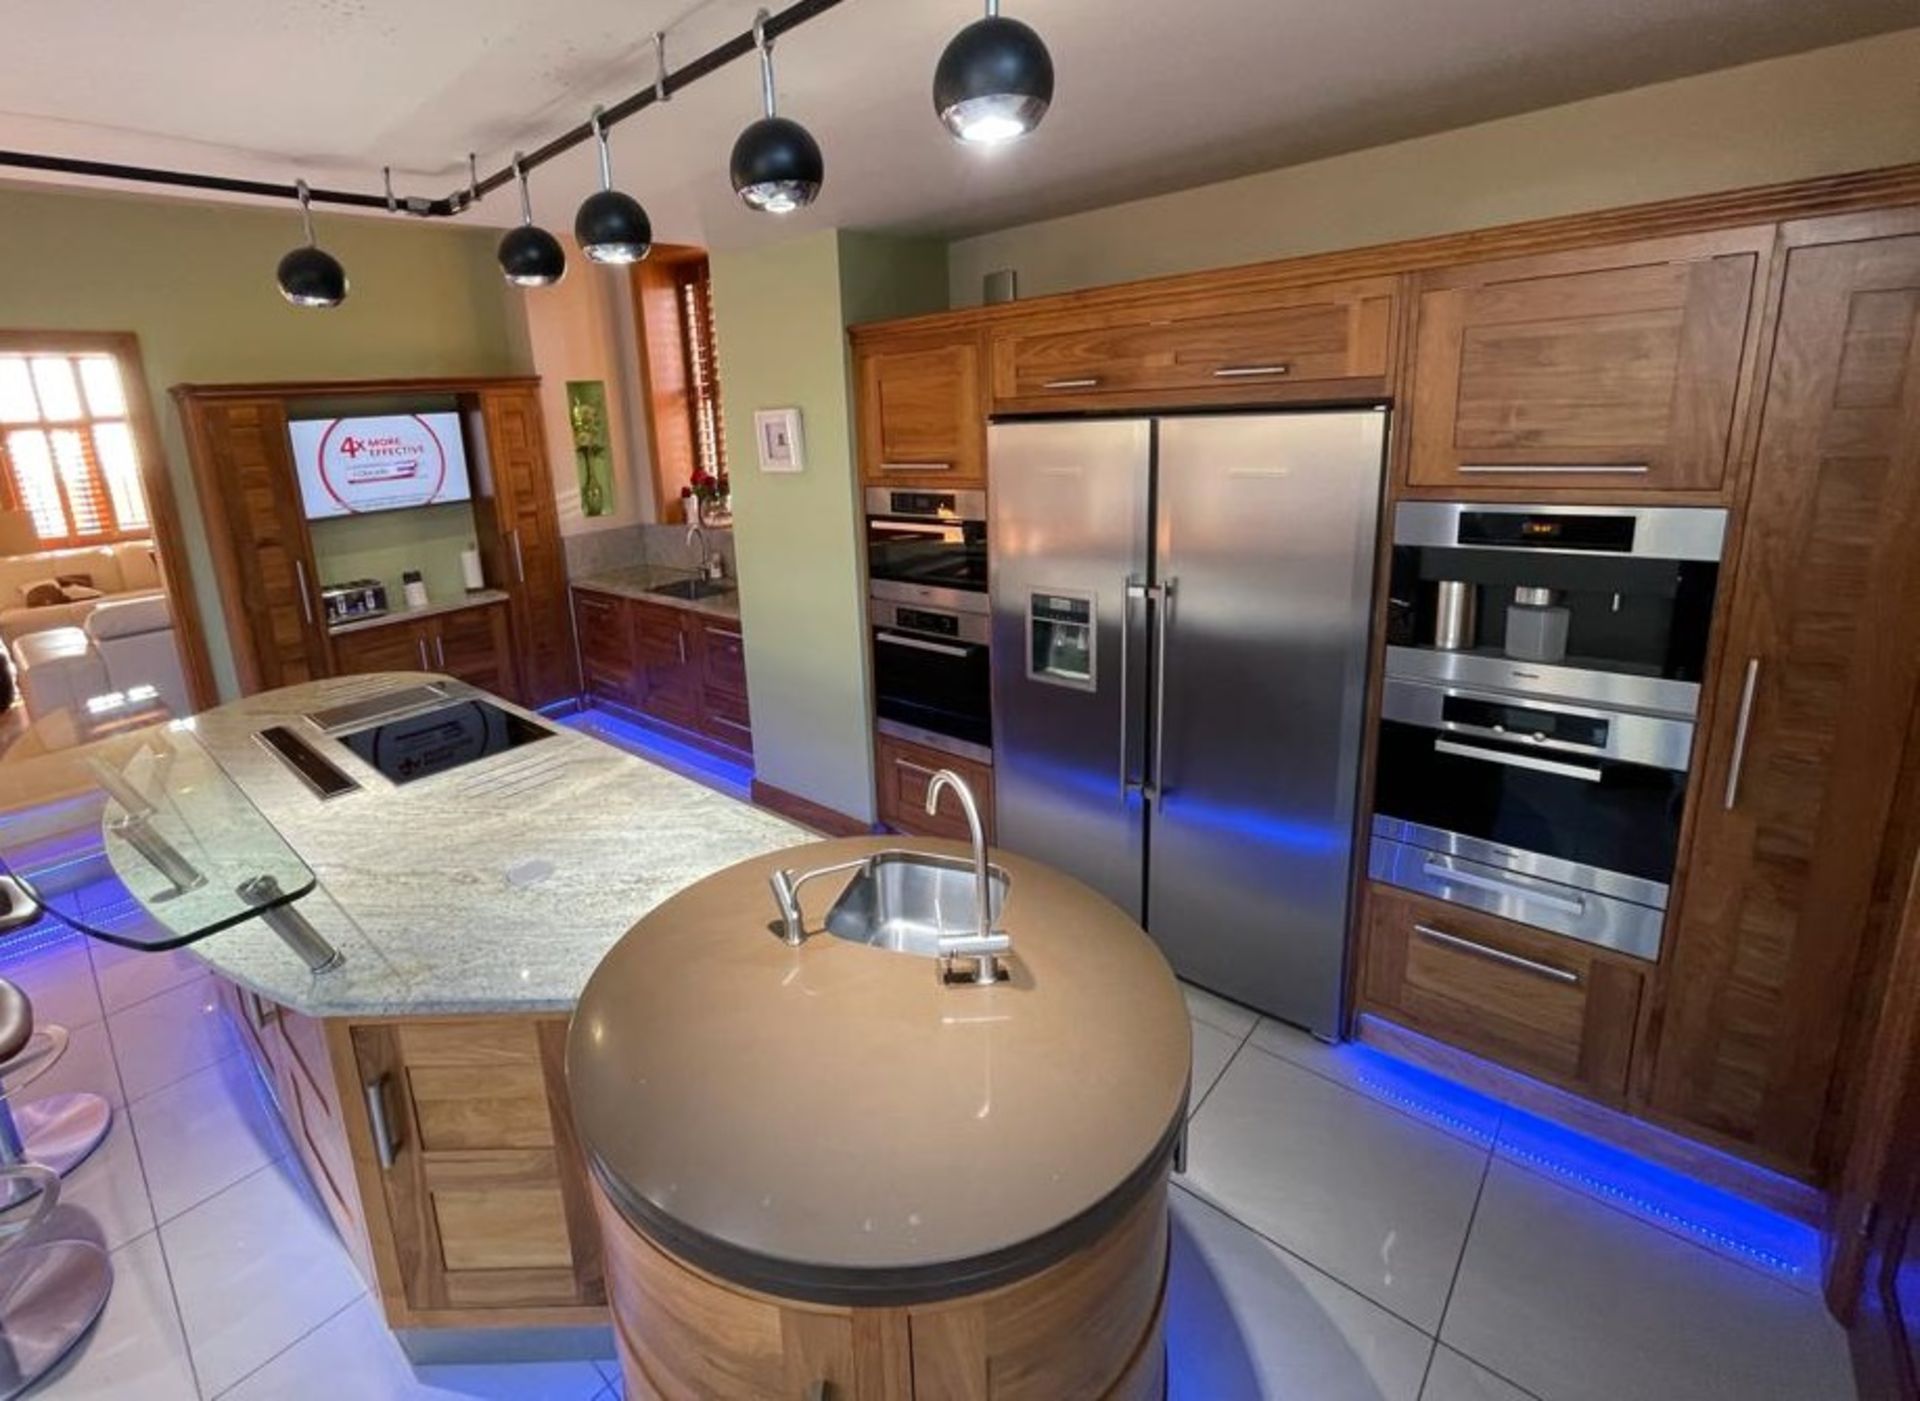 1 x Bespoke Curved Fitted Kitchen With Solid Wood Walnut Doors, Integrated Appliances, Granite Tops - Image 7 of 147